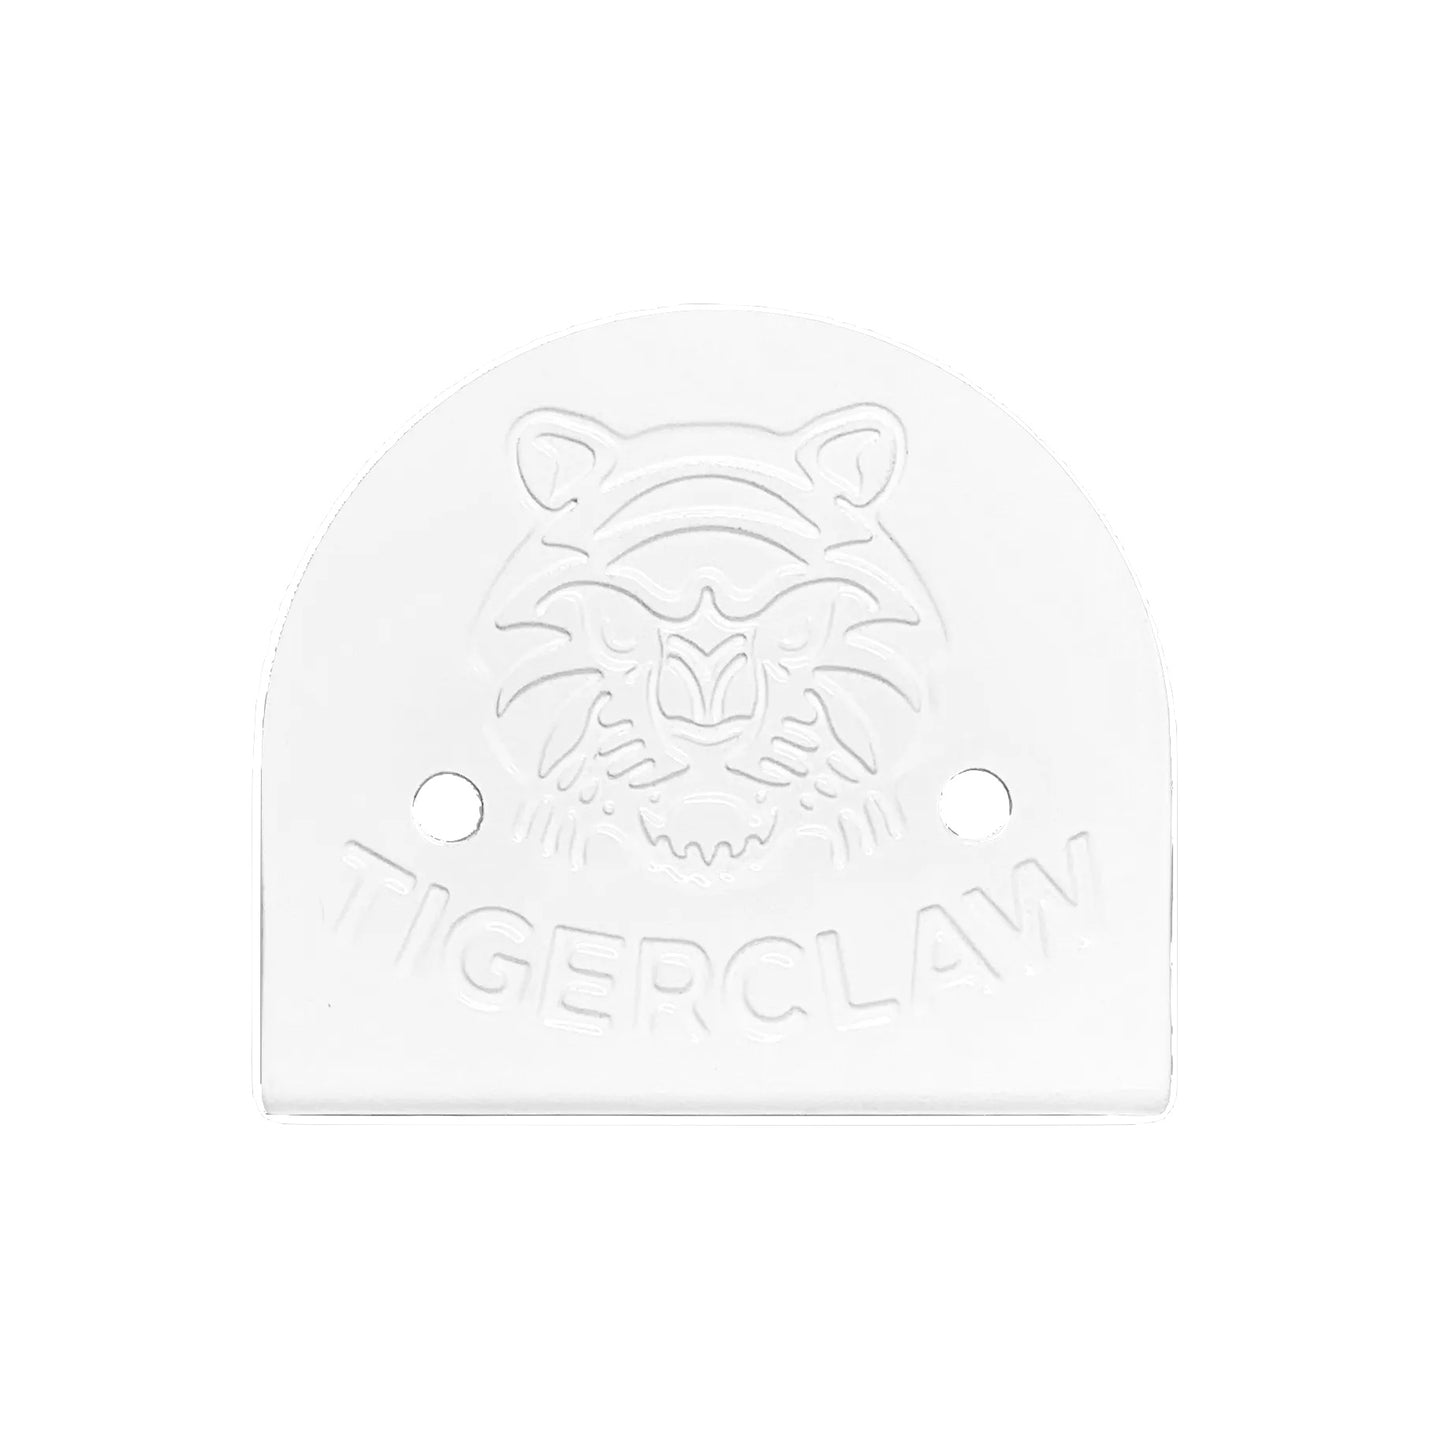 Tiger Claw wall hanger white